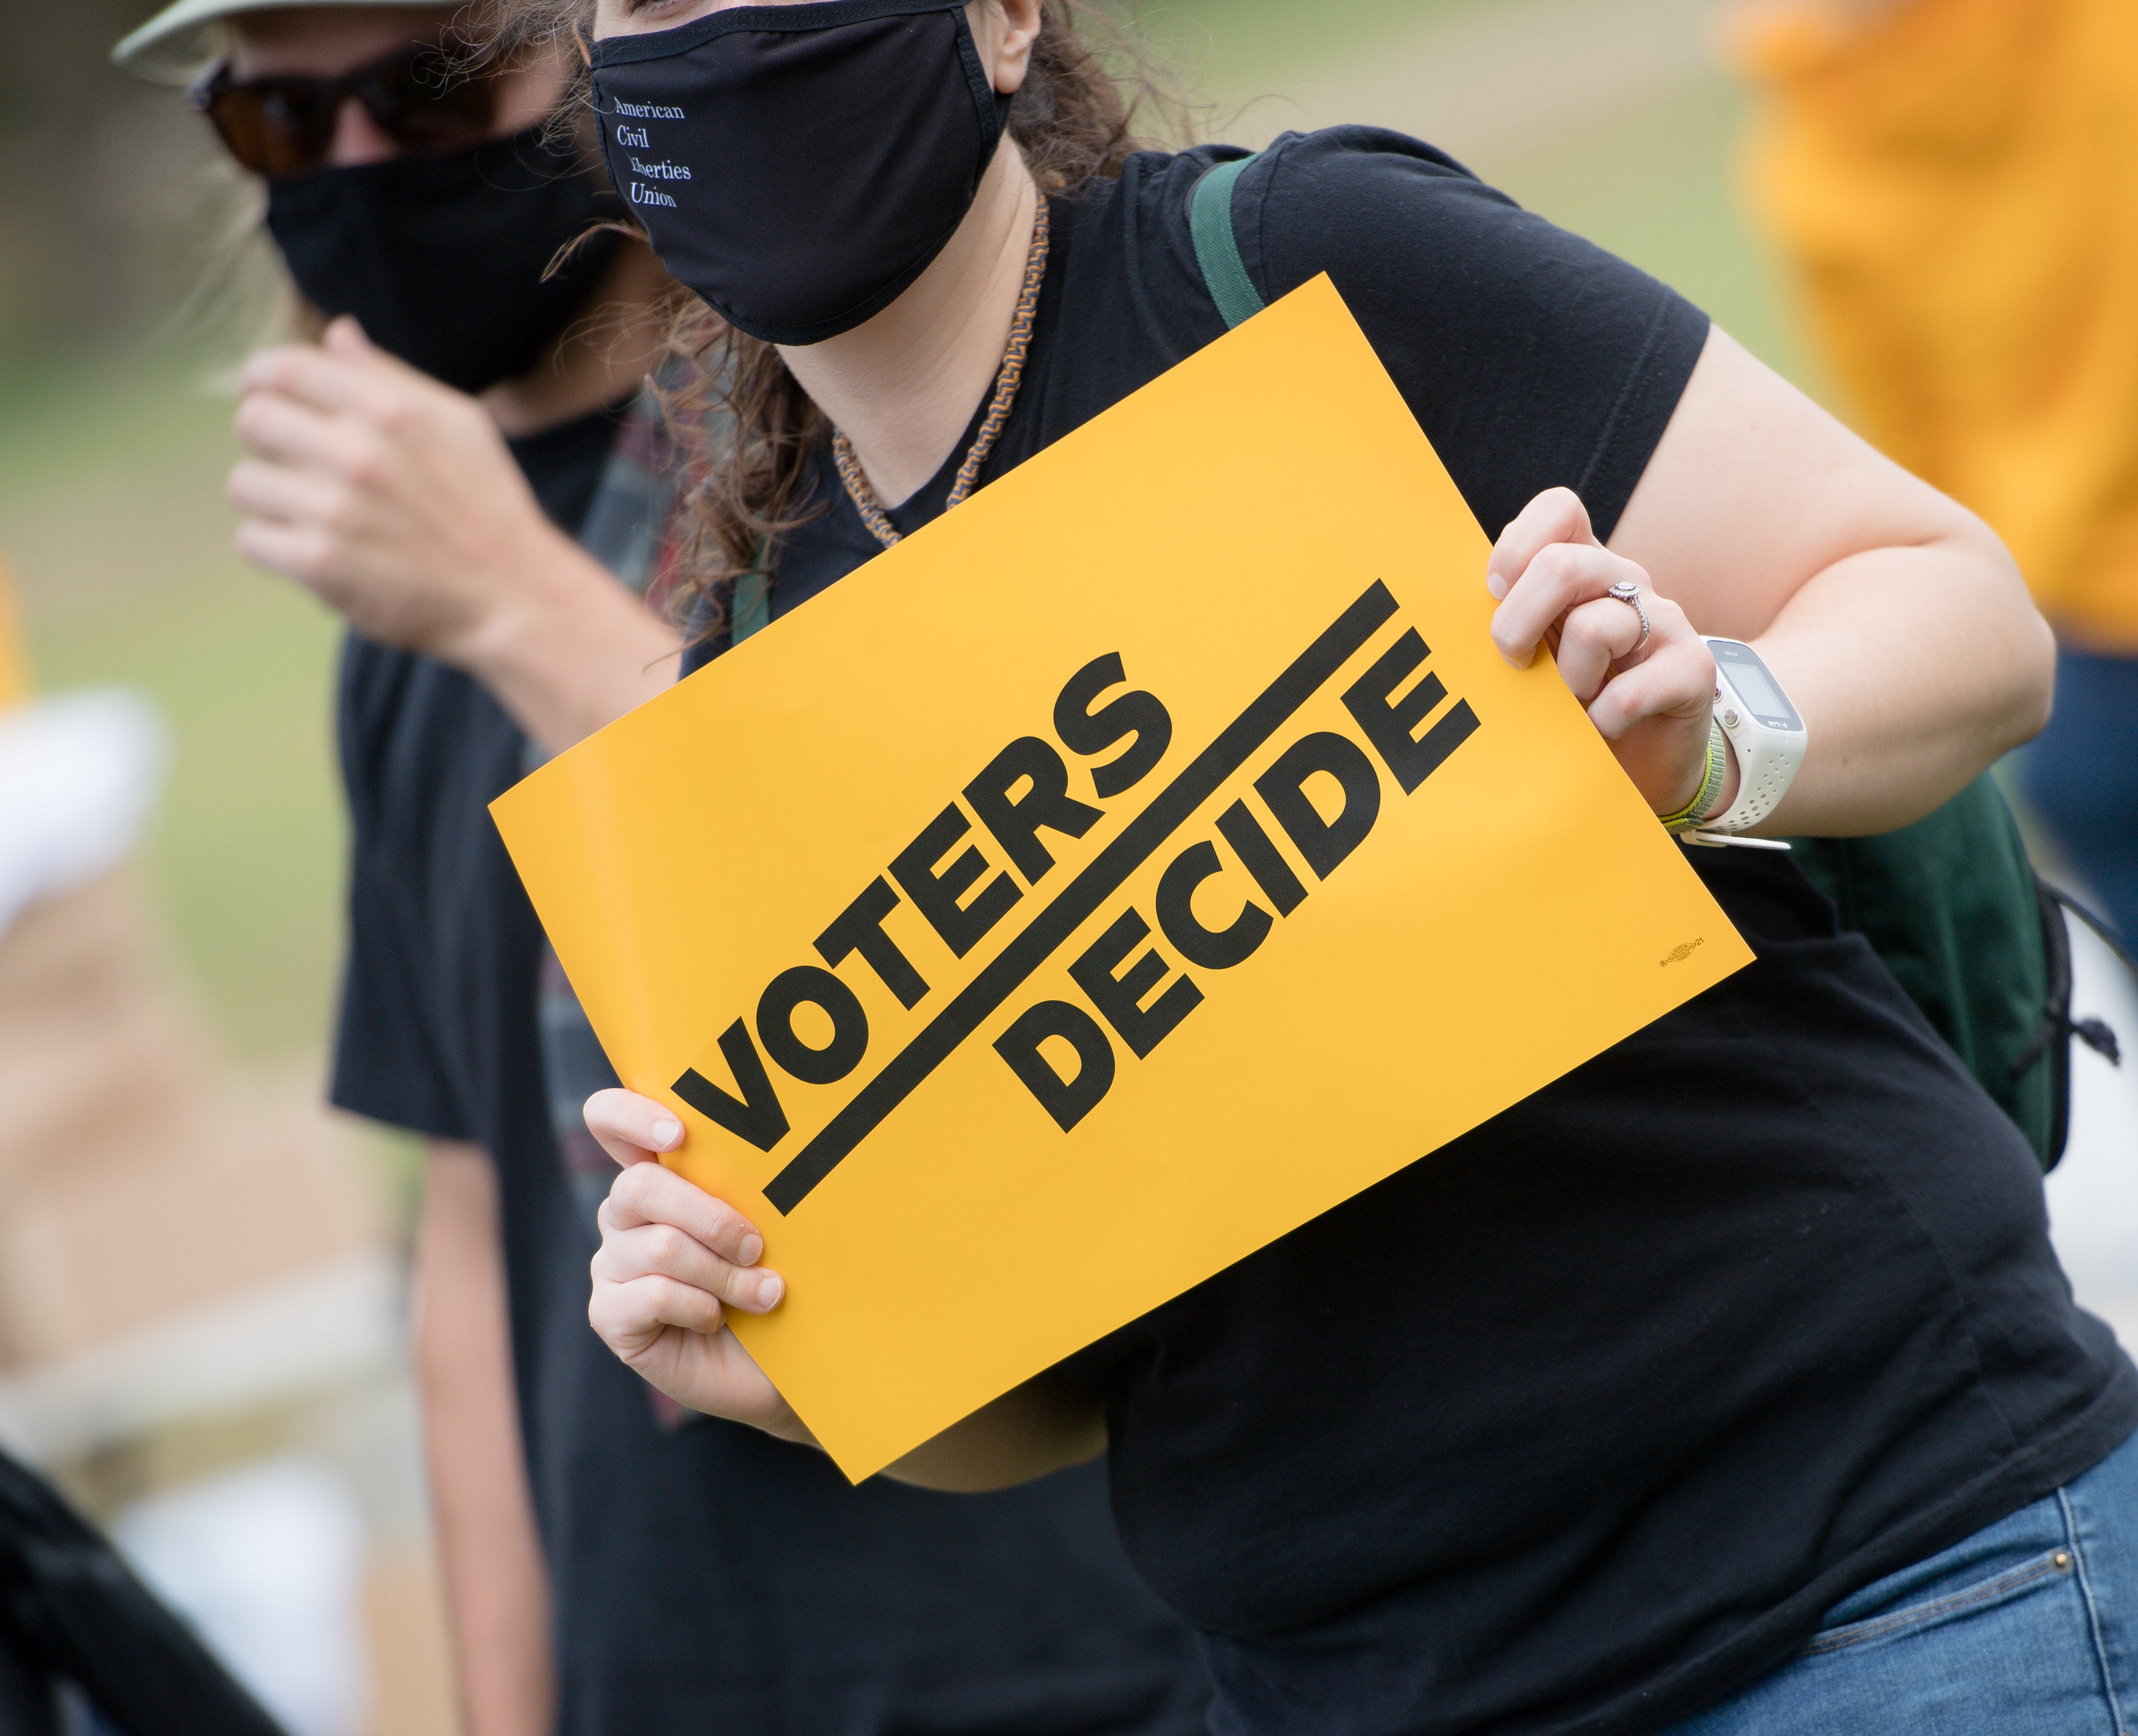 Rallygoers in Freedom Park deliver the ‘Count Every Vote’ message in the wake of the presidential election results on 07 November, 2020 in Atlanta, Georgia. Election officials in Georgia’s 159 counties are undertaking a hand tally of the 2020 race.